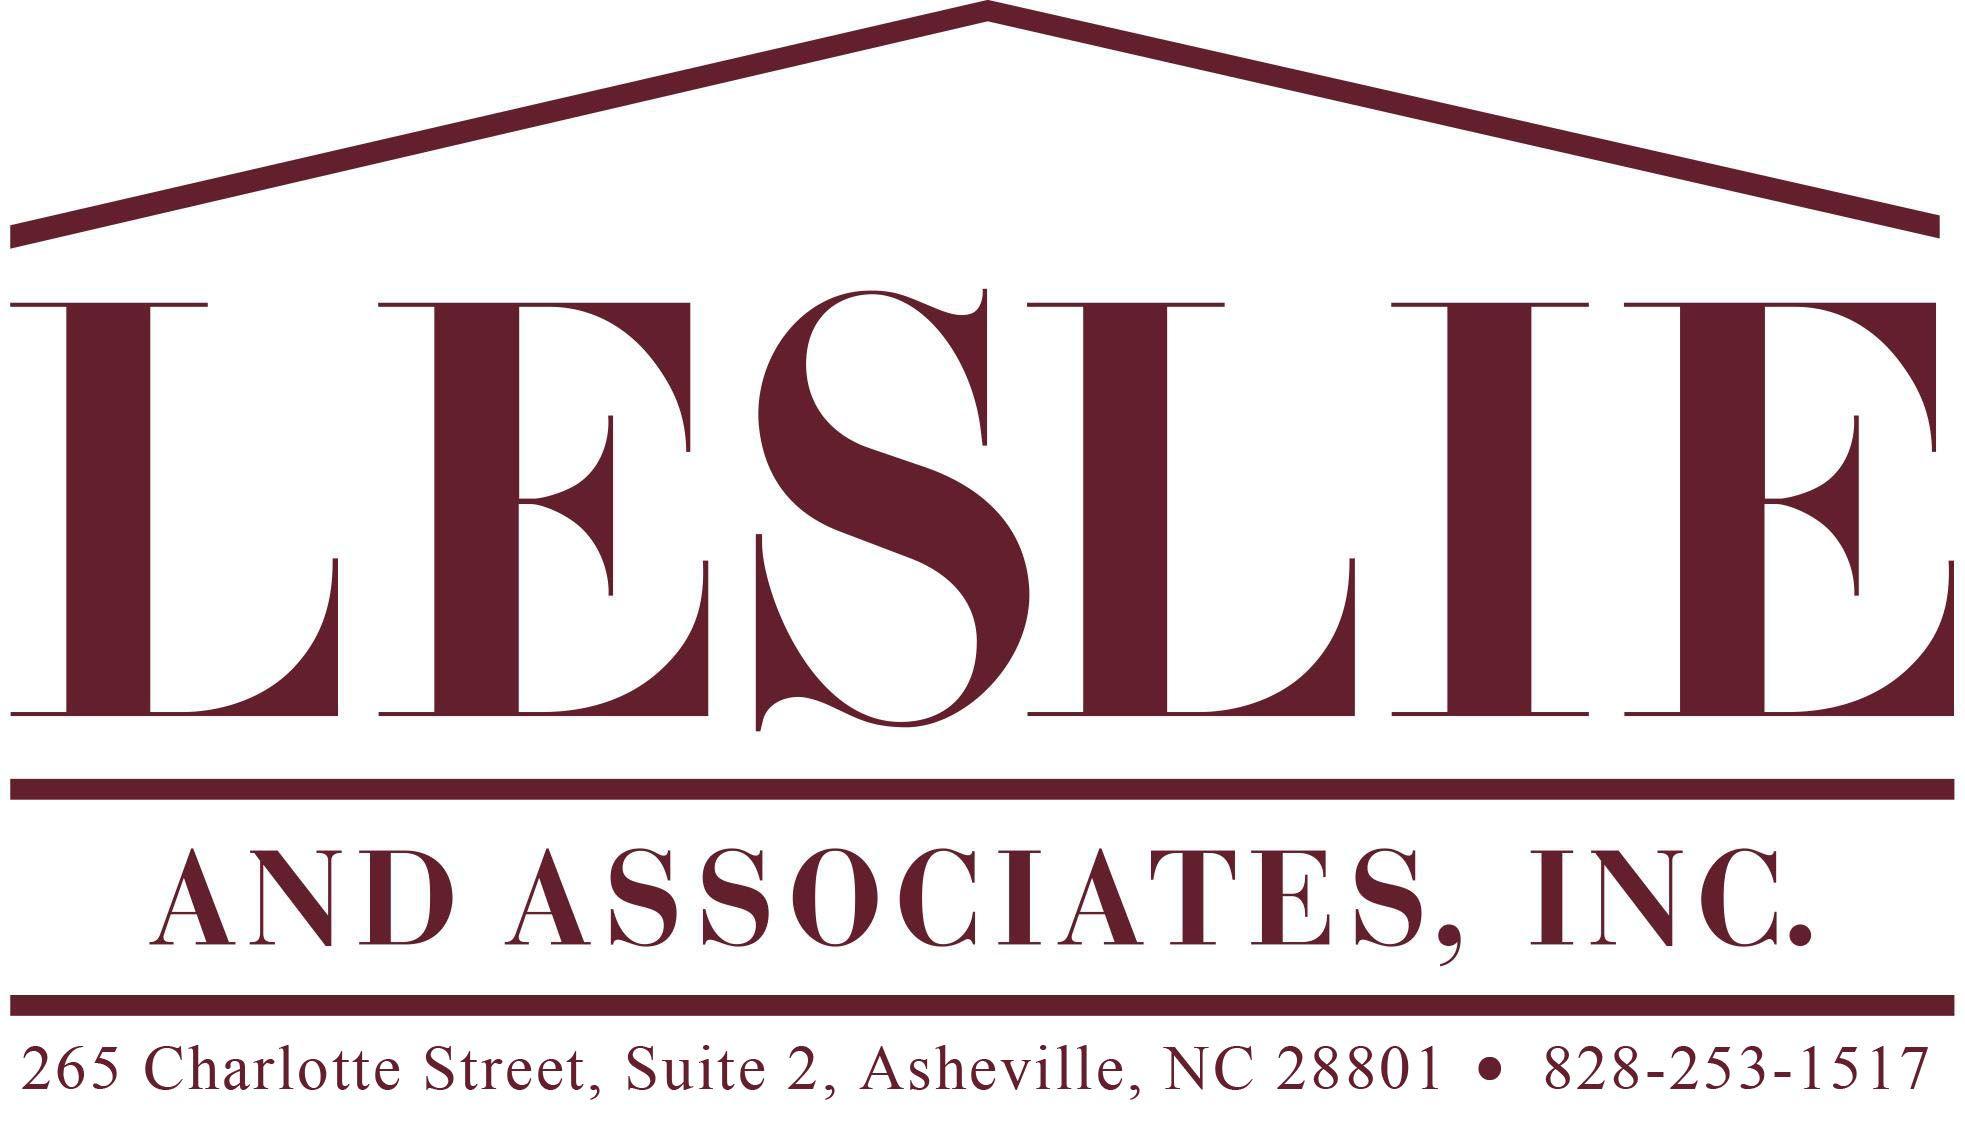 Leslie Logo - Logo Leslie And Assoc With Contact Info. The Preservation Society